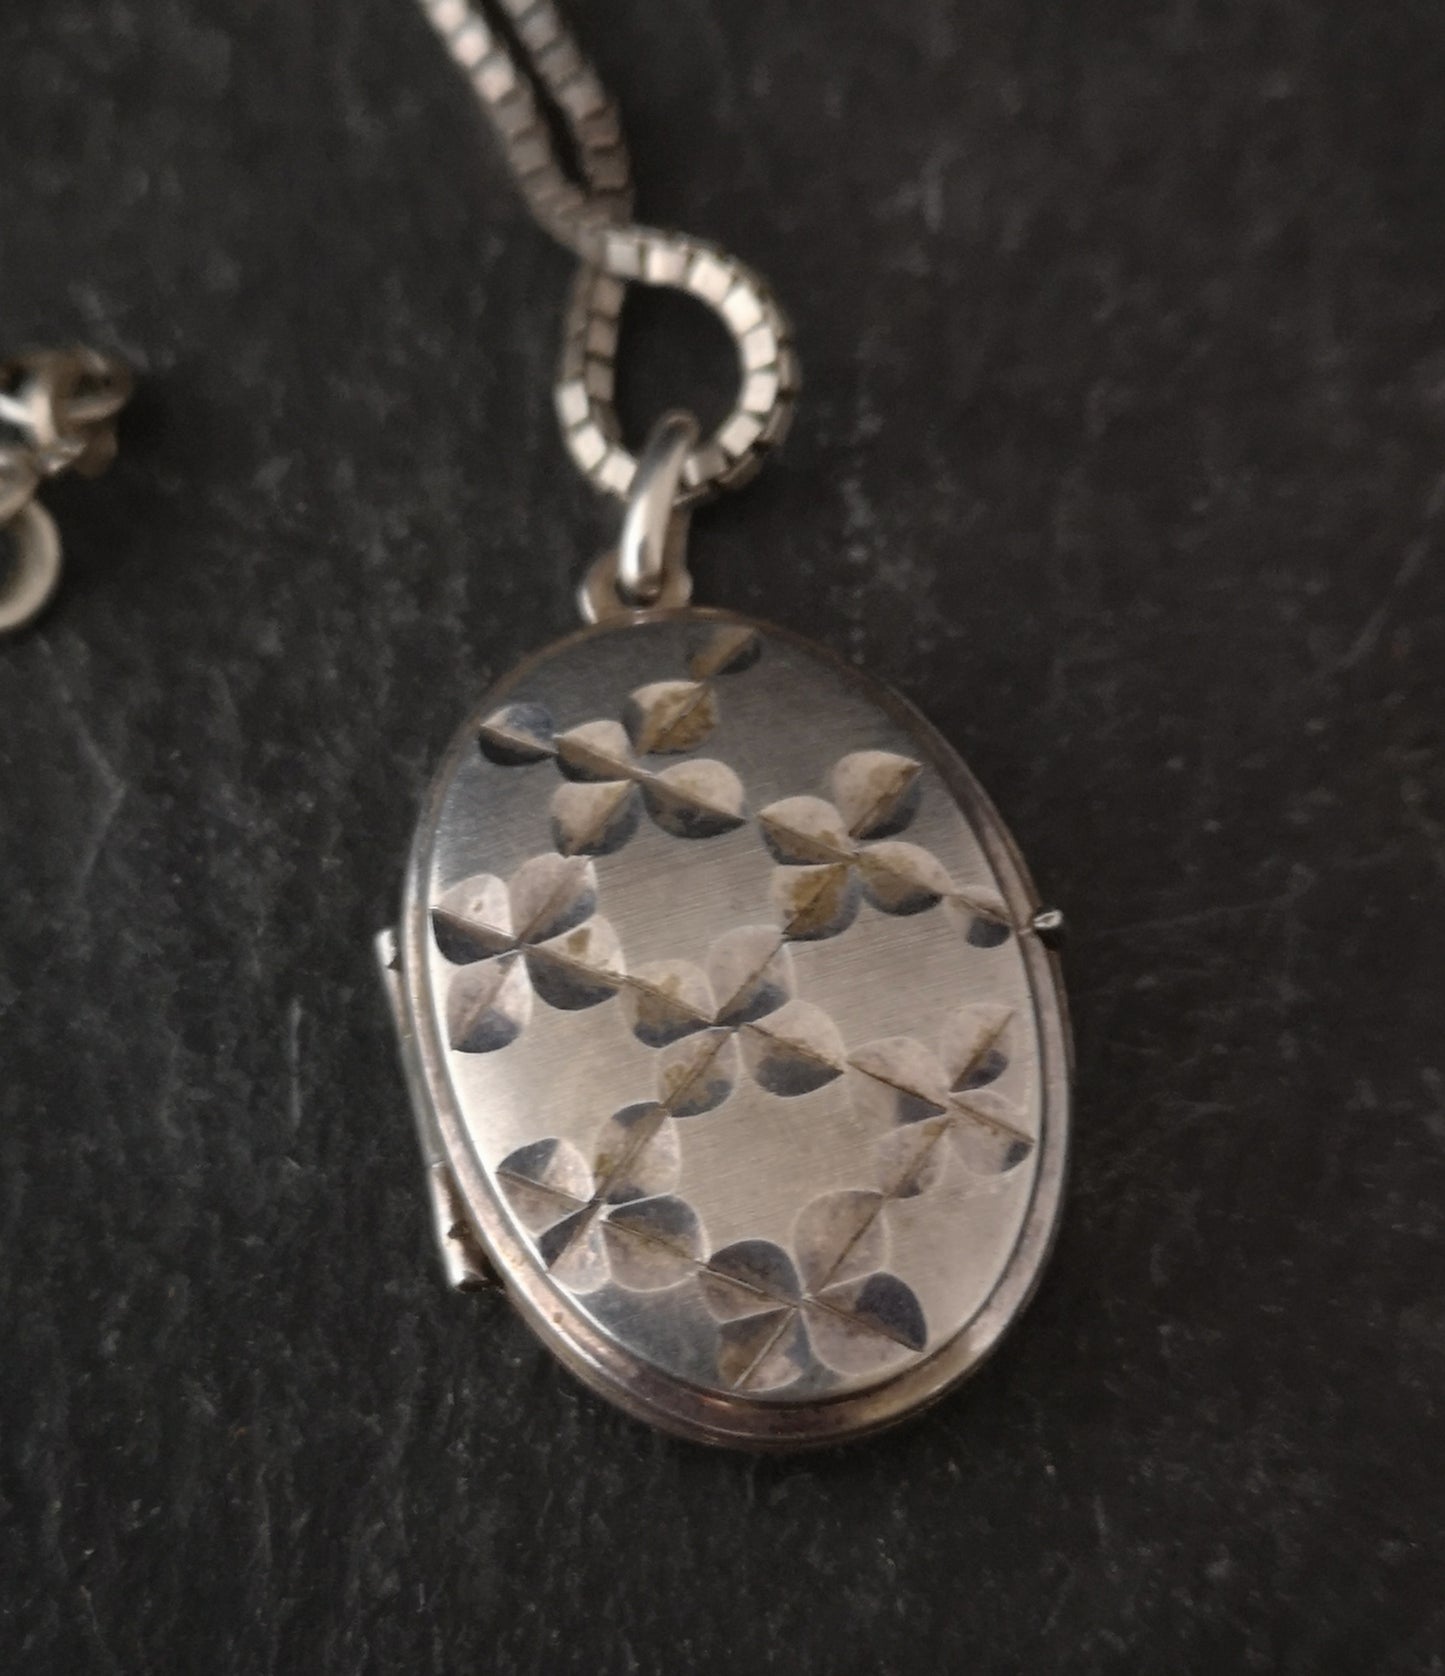 Vintage silver locket and chain, necklace